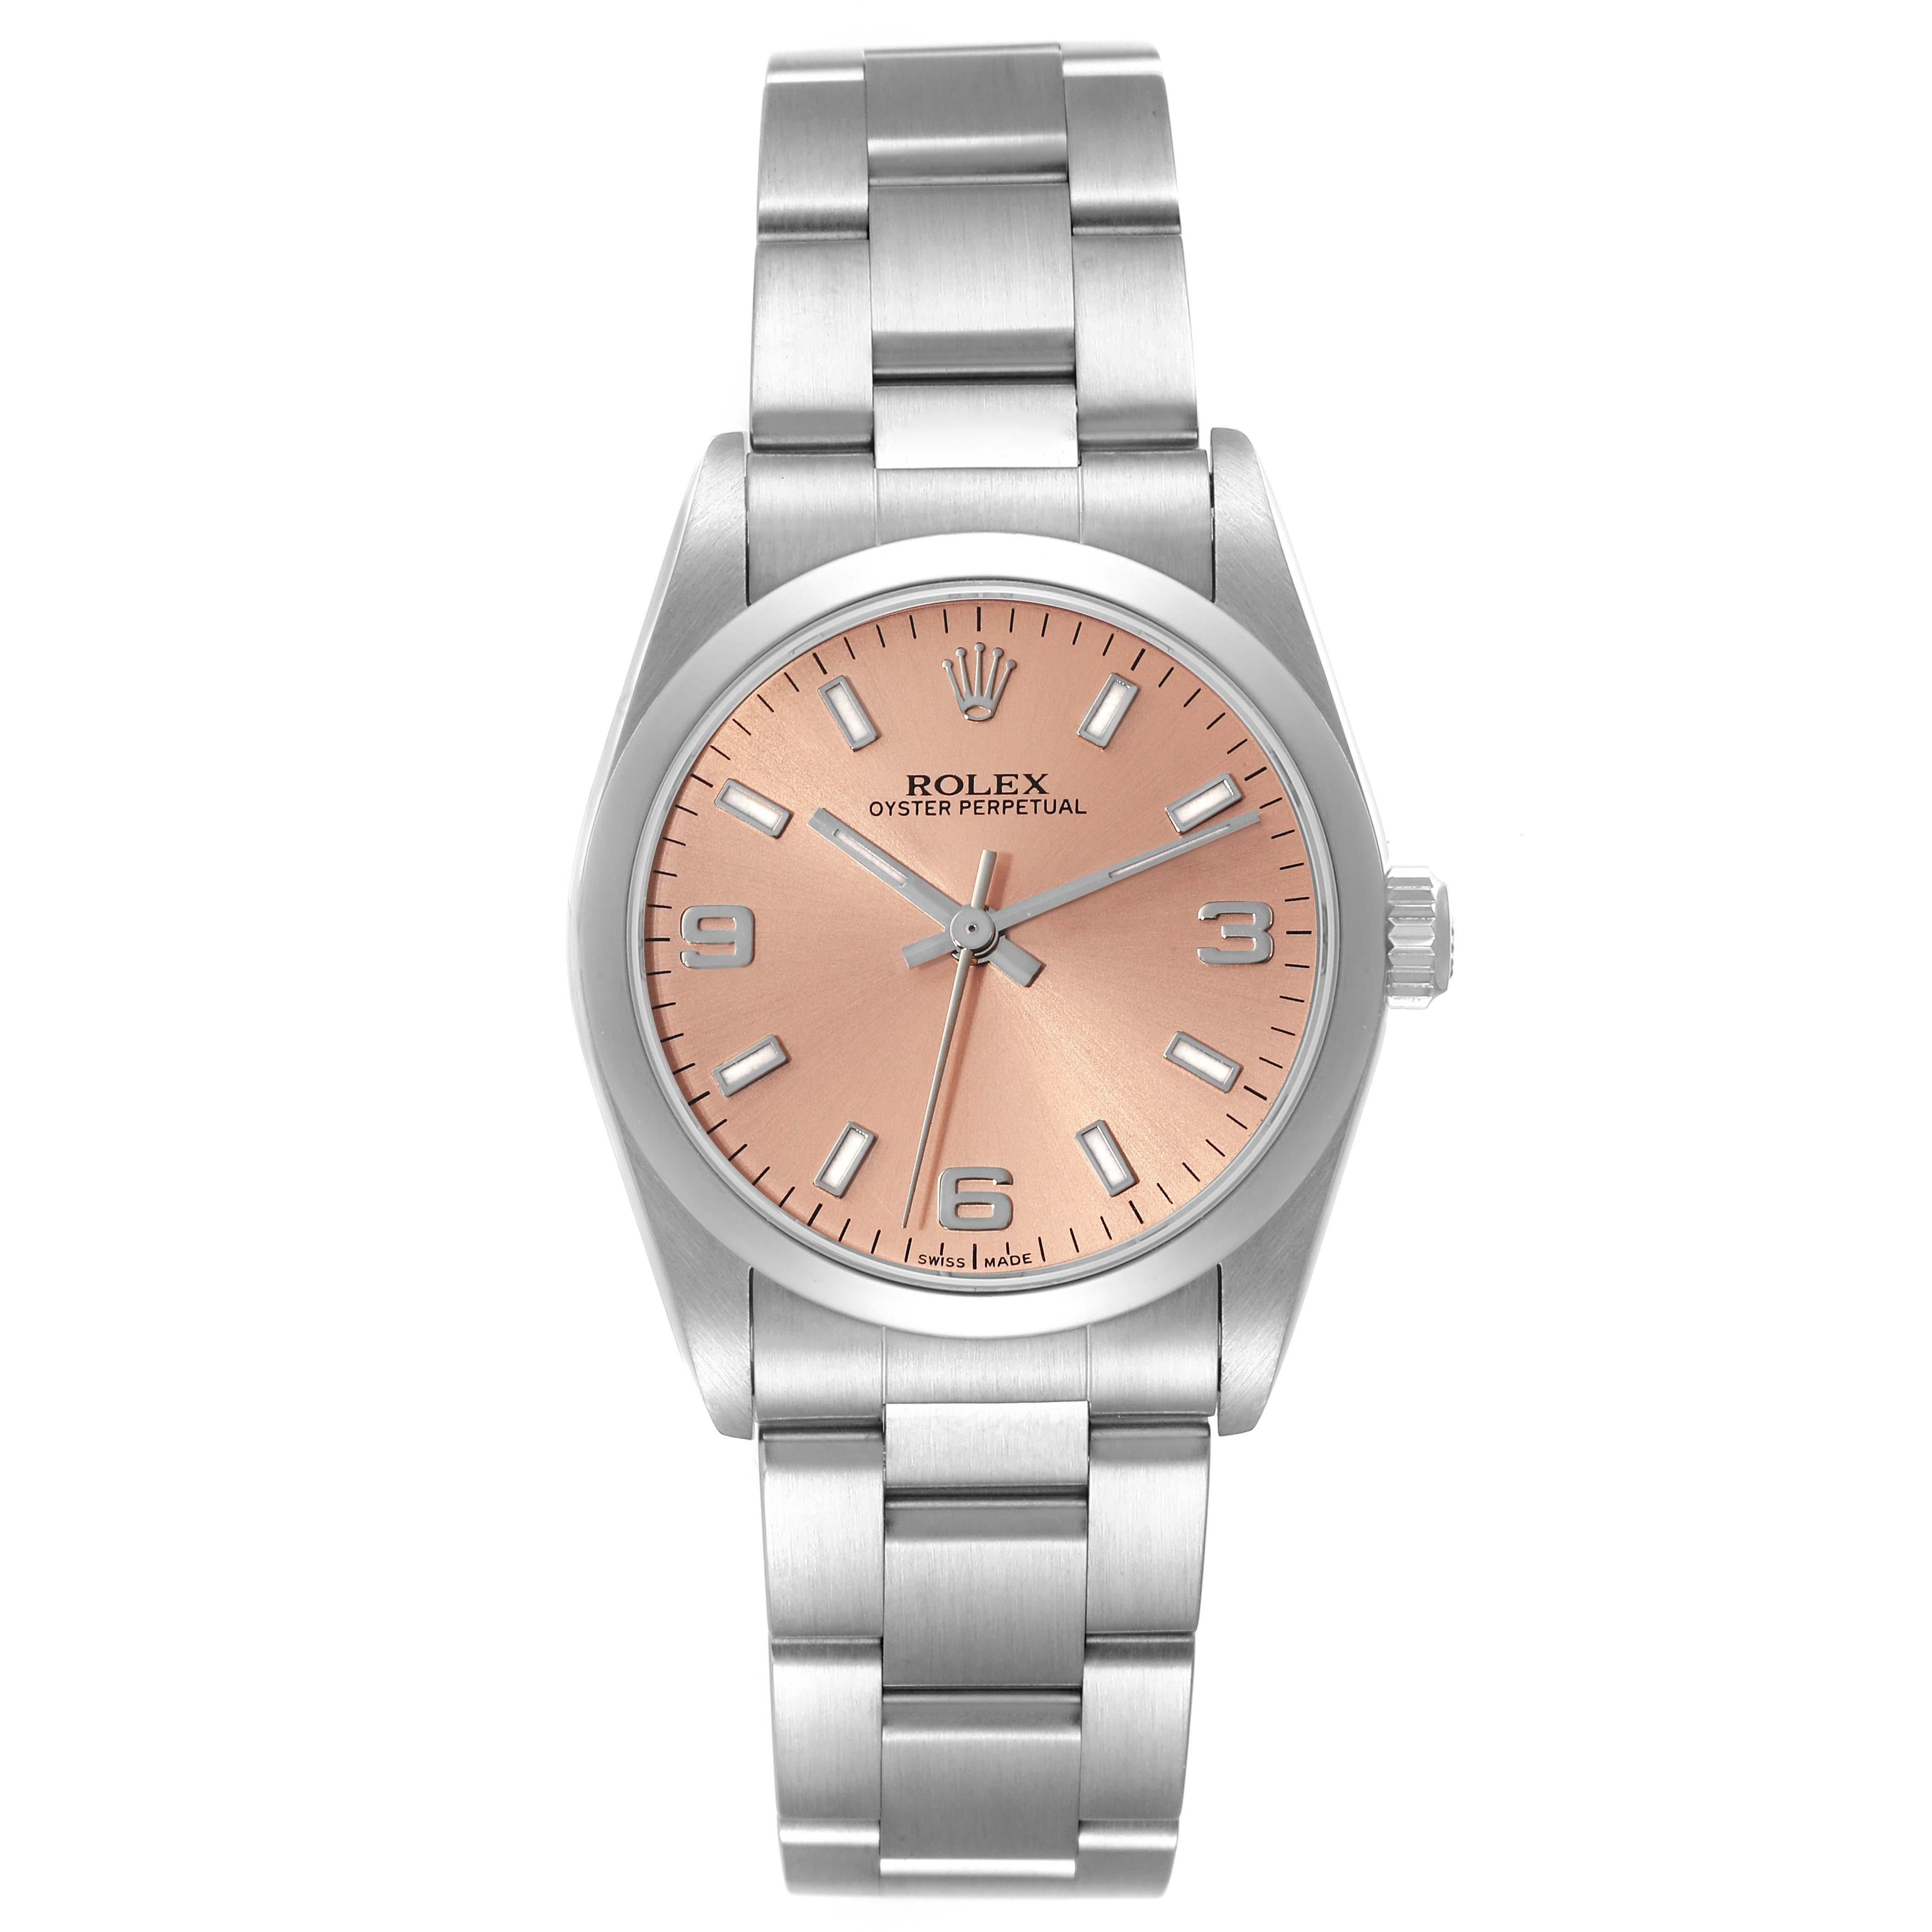 Rolex Oyster Perpetual Midsize Salmon Dial Steel Ladies Watch 77080 Box Papers. Officially certified chronometer automatic self-winding movement. Stainless steel oyster case 31.0 mm in diameter. Rolex logo on the crown. Stainless steel smooth bezel.